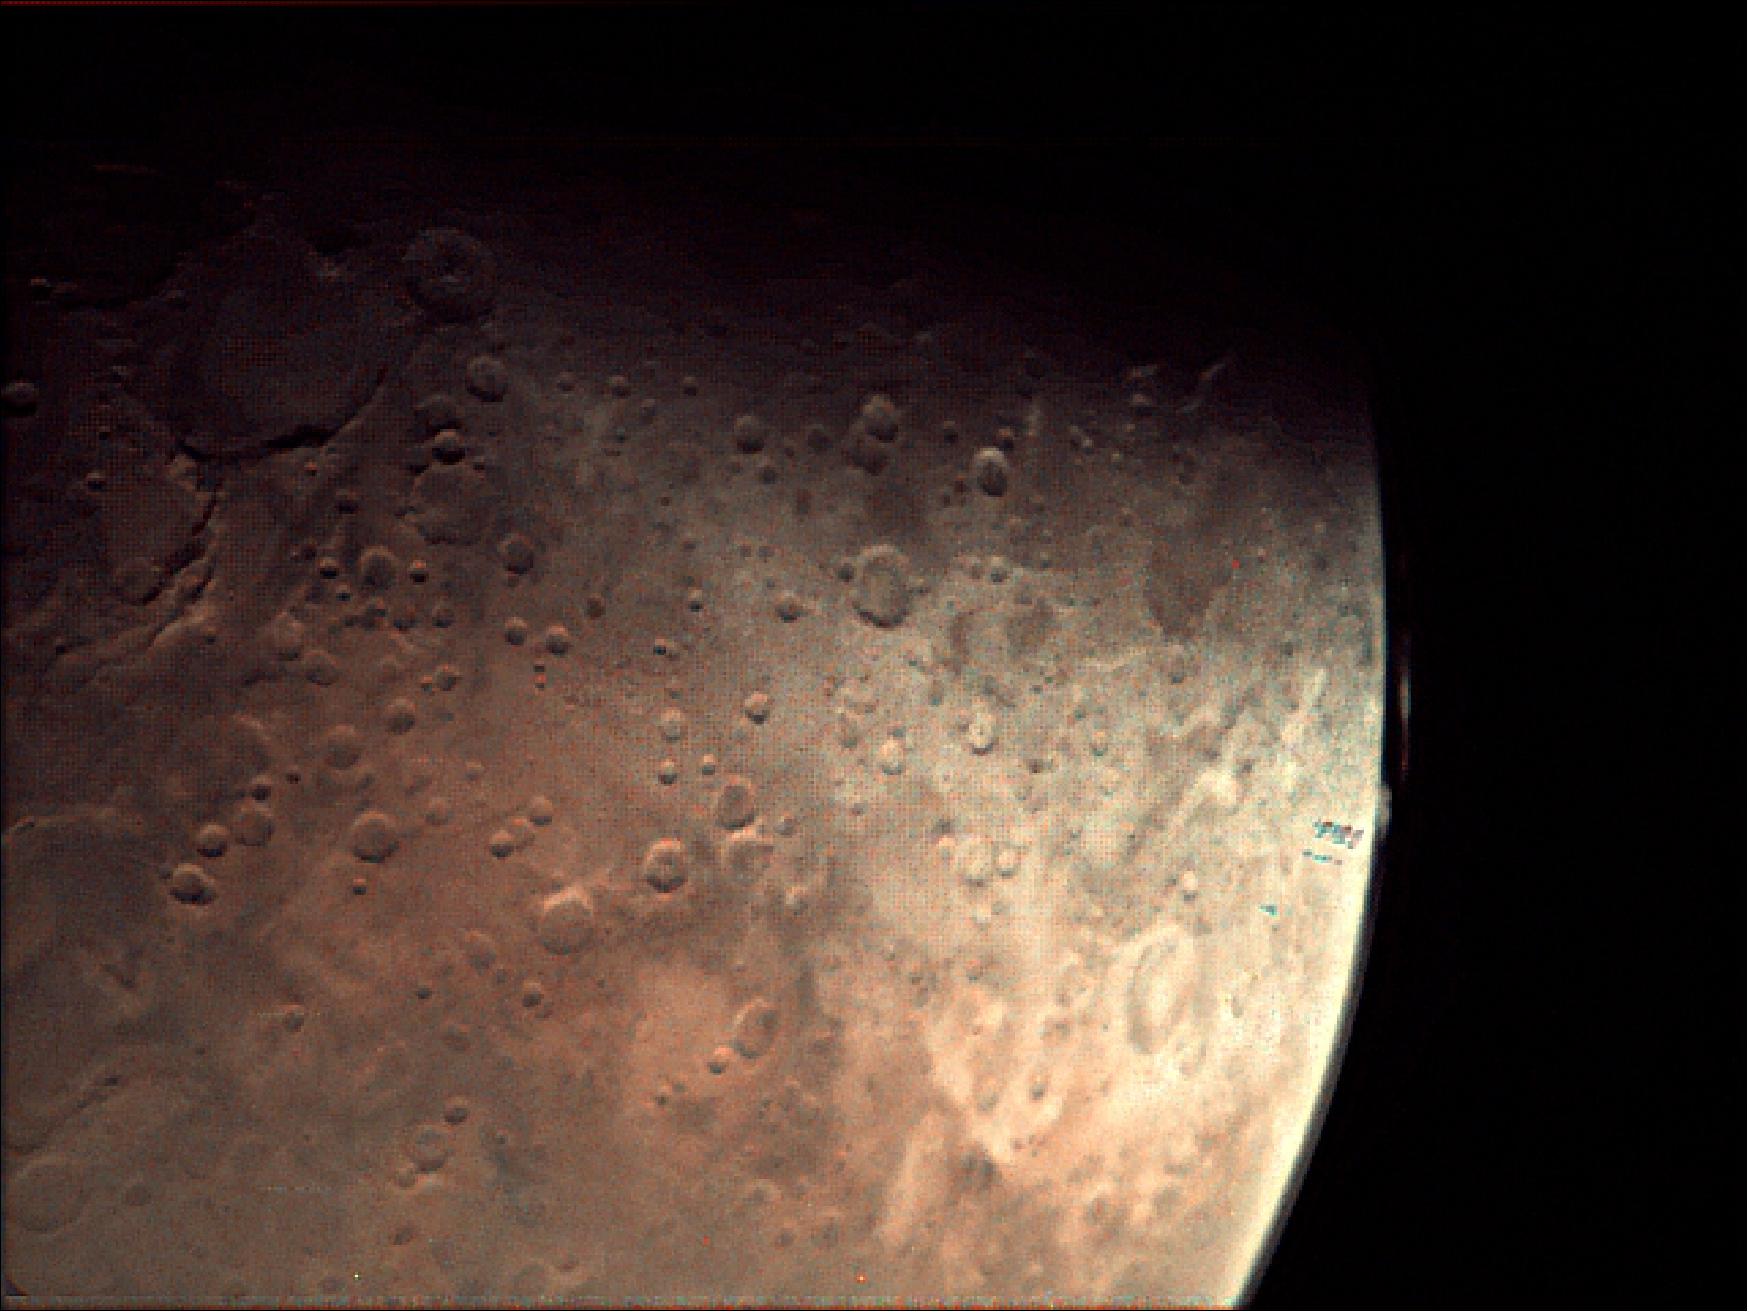 Figure 120: Image from VMC on-board Mars Express acquired on 27 November 2019 (image credit: ESA)